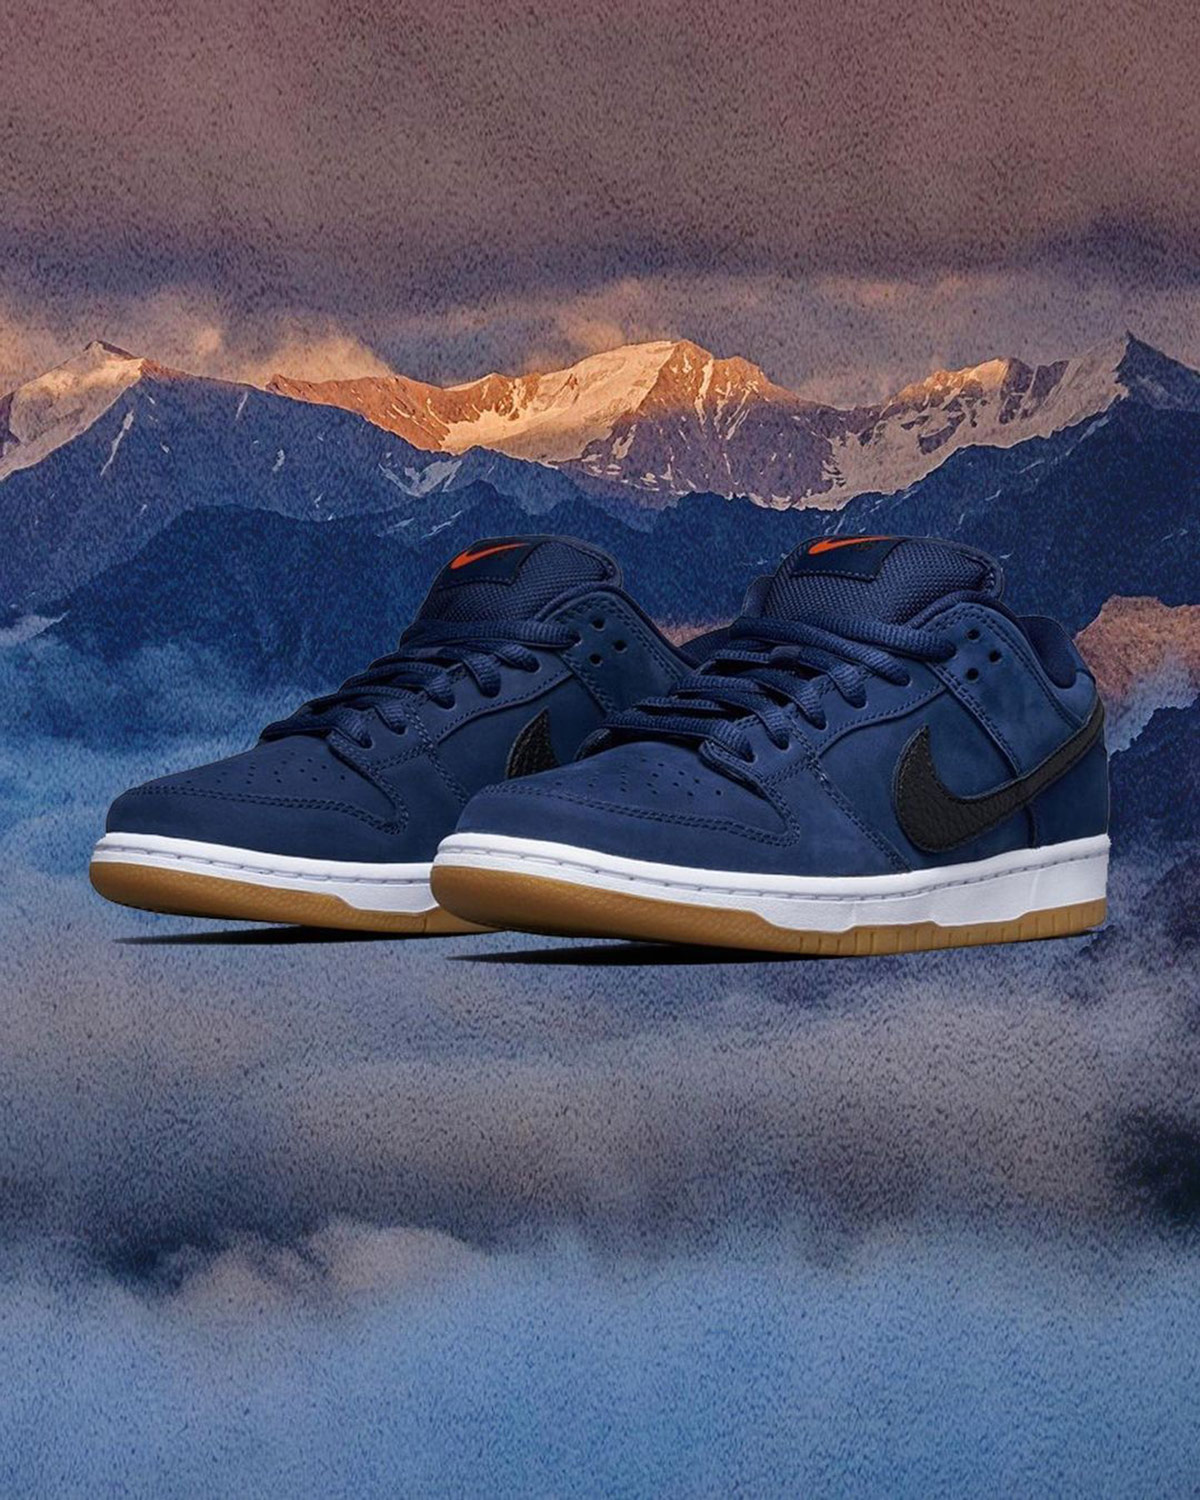 nike-sb-dunk-low-pro-iso-navy-release-date-price-01